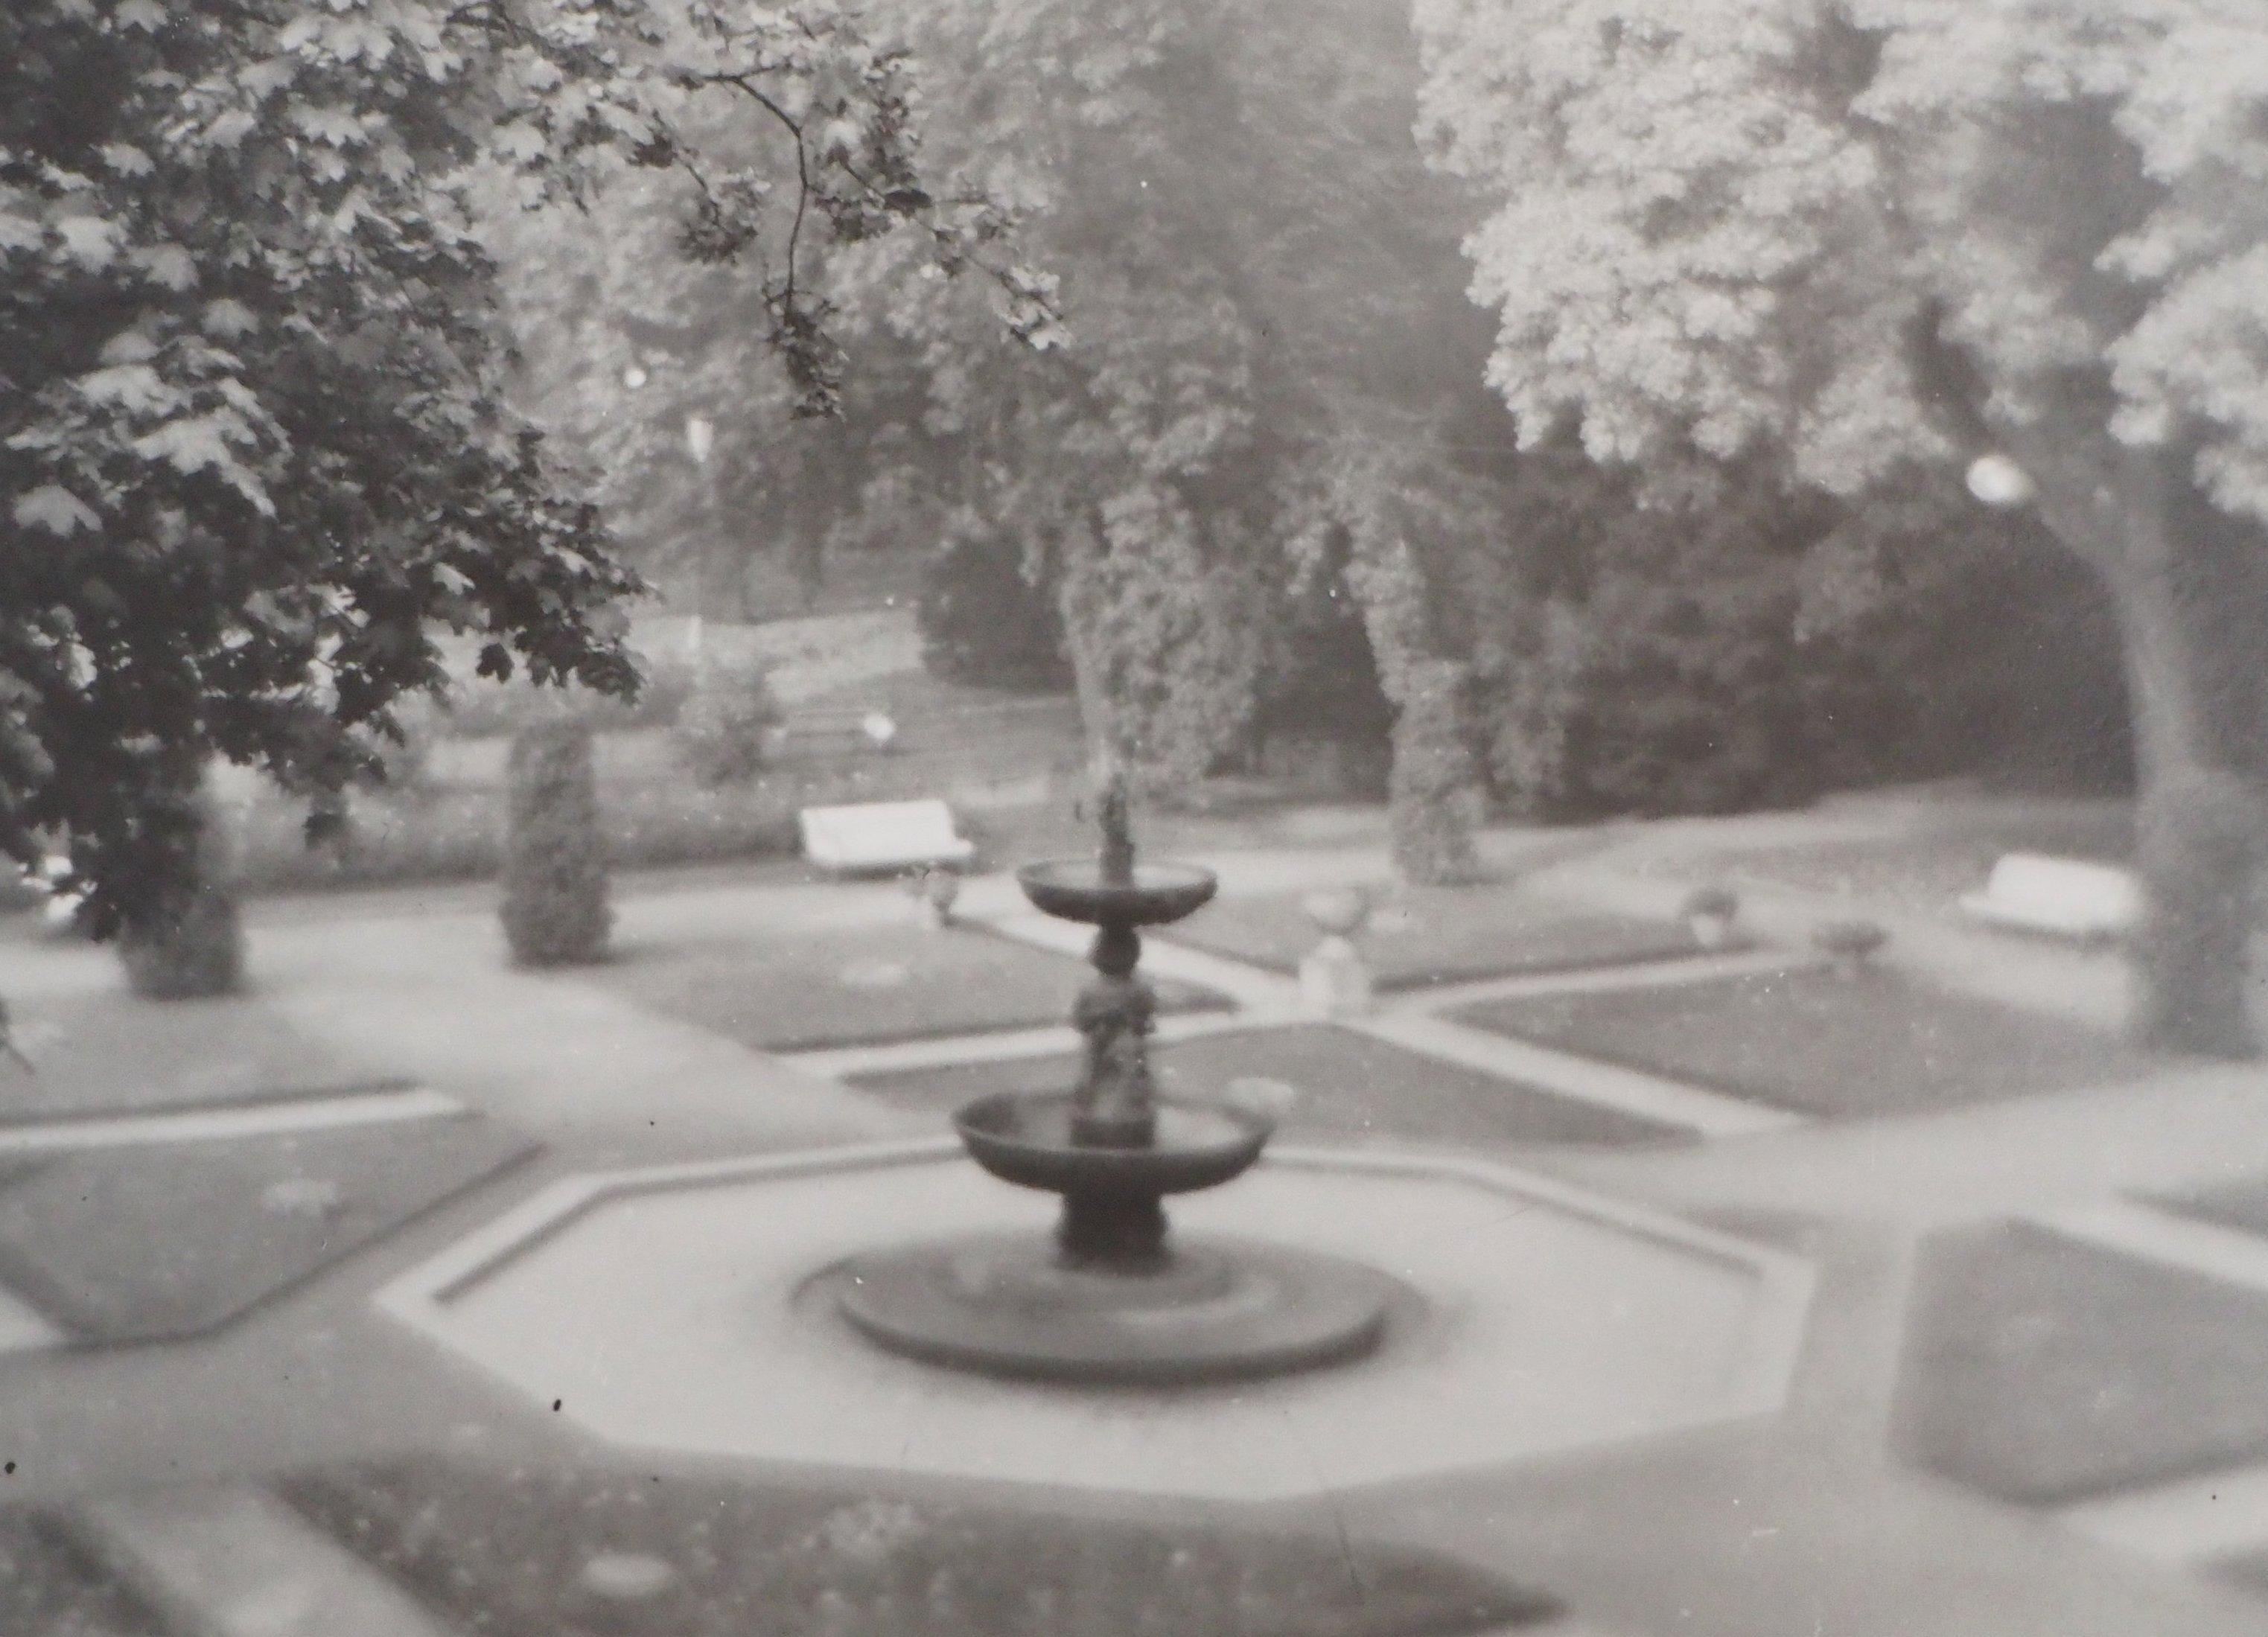 Josef Sudek
Prague : Royal Garden, 1969

Original gelatin silver print
Dated 1969 on the back (see picture)
12.5 x 16.5 cm (c. 4.7 x 6.3 in)

Authenticated by the collection stamp on the back (see picture)

Excellent condition